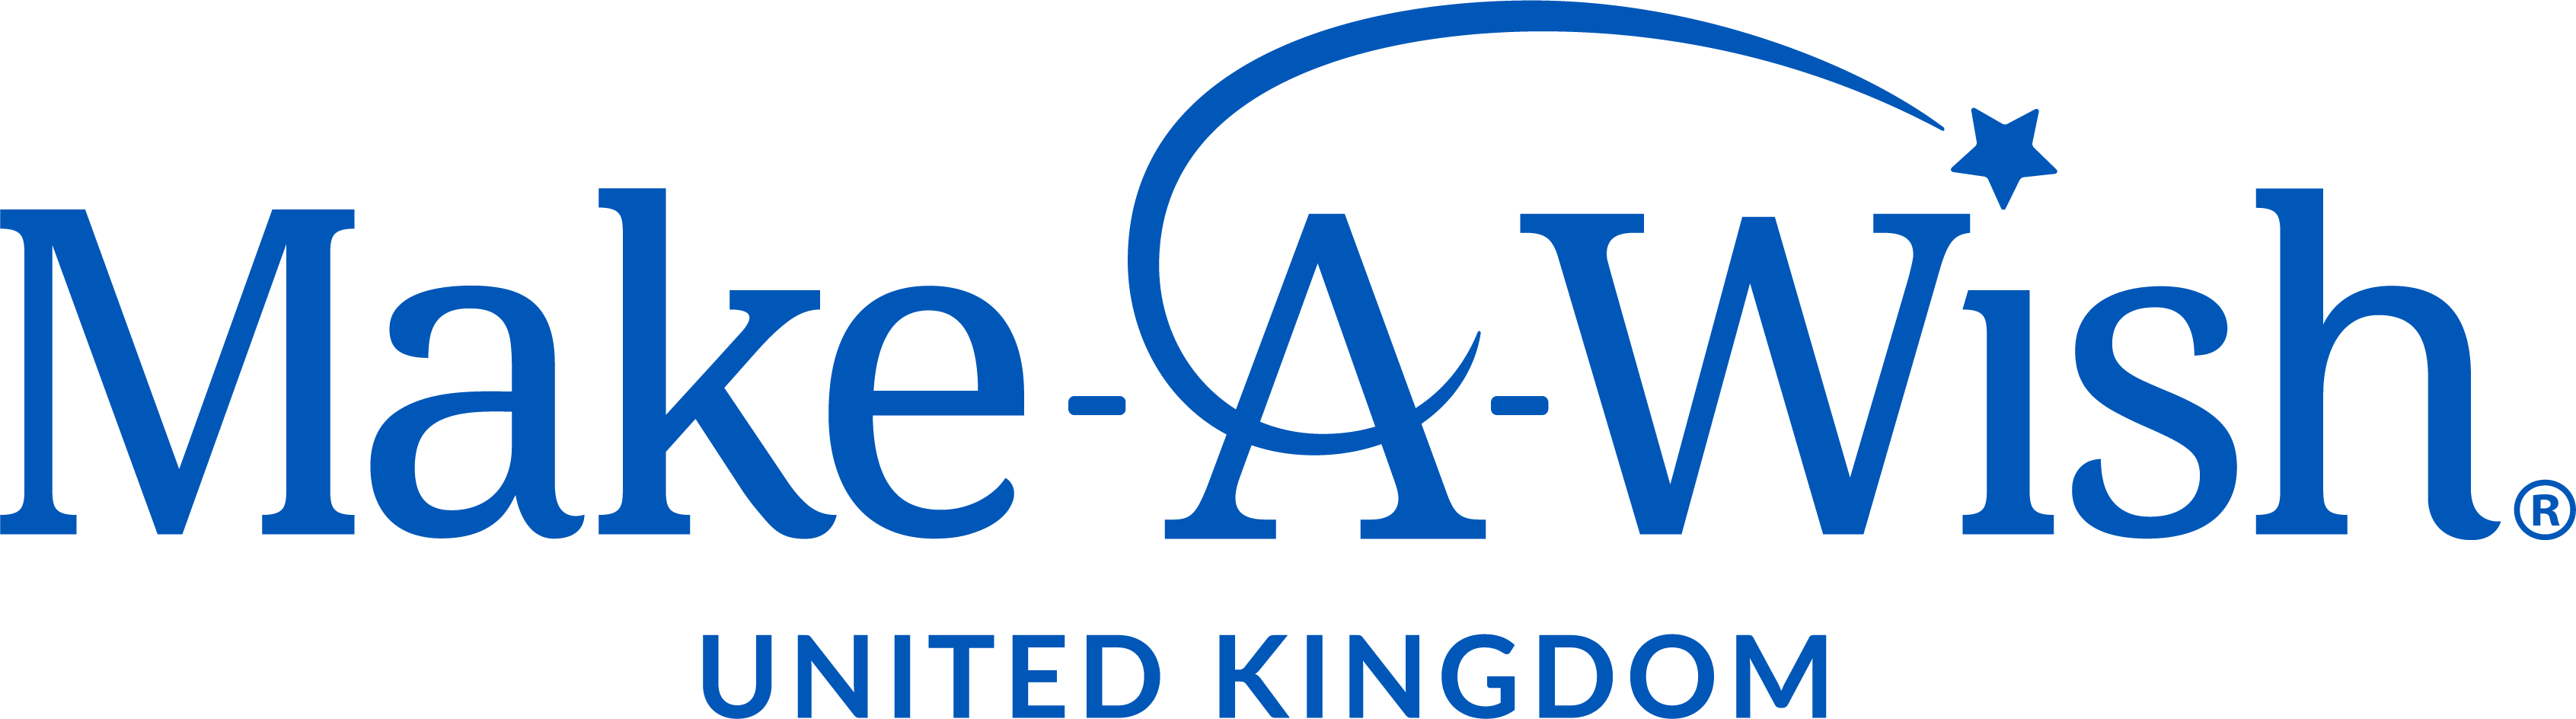 Book online for Make-A-Wish® UK